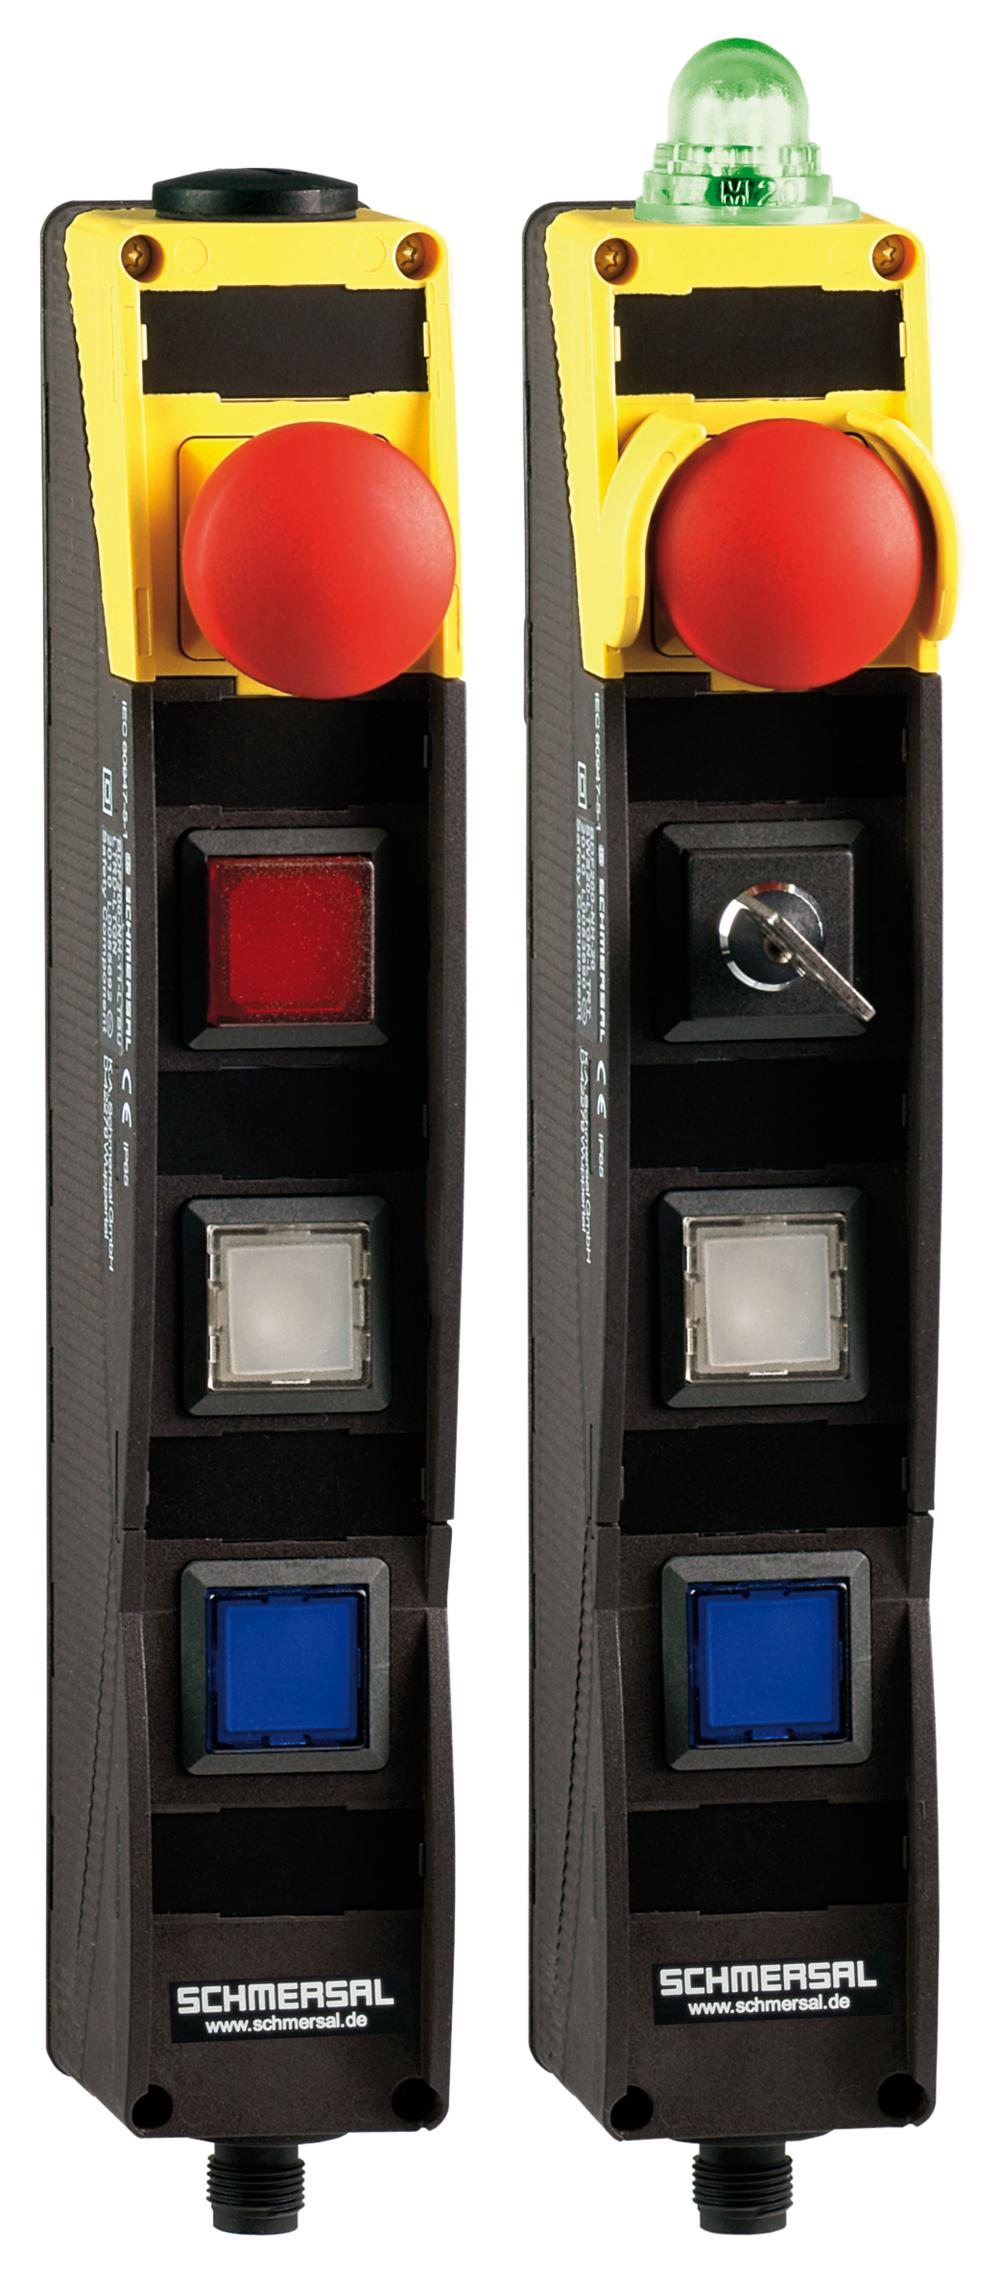 Schmersal BDF200-ST1-AS-NH-SWS20-LTWH-LTBU AS interface safety at work; Safety switchgear; with connector plug M12 bottom; Integrated AS-Interface; Pos 1: E-STOP; Pos 3: WHITE illuminated pushbutton; Pos 2: Key selector switch, 2 positions; Pos 4: BLUE illuminated pushbutton; slender shock-proof t